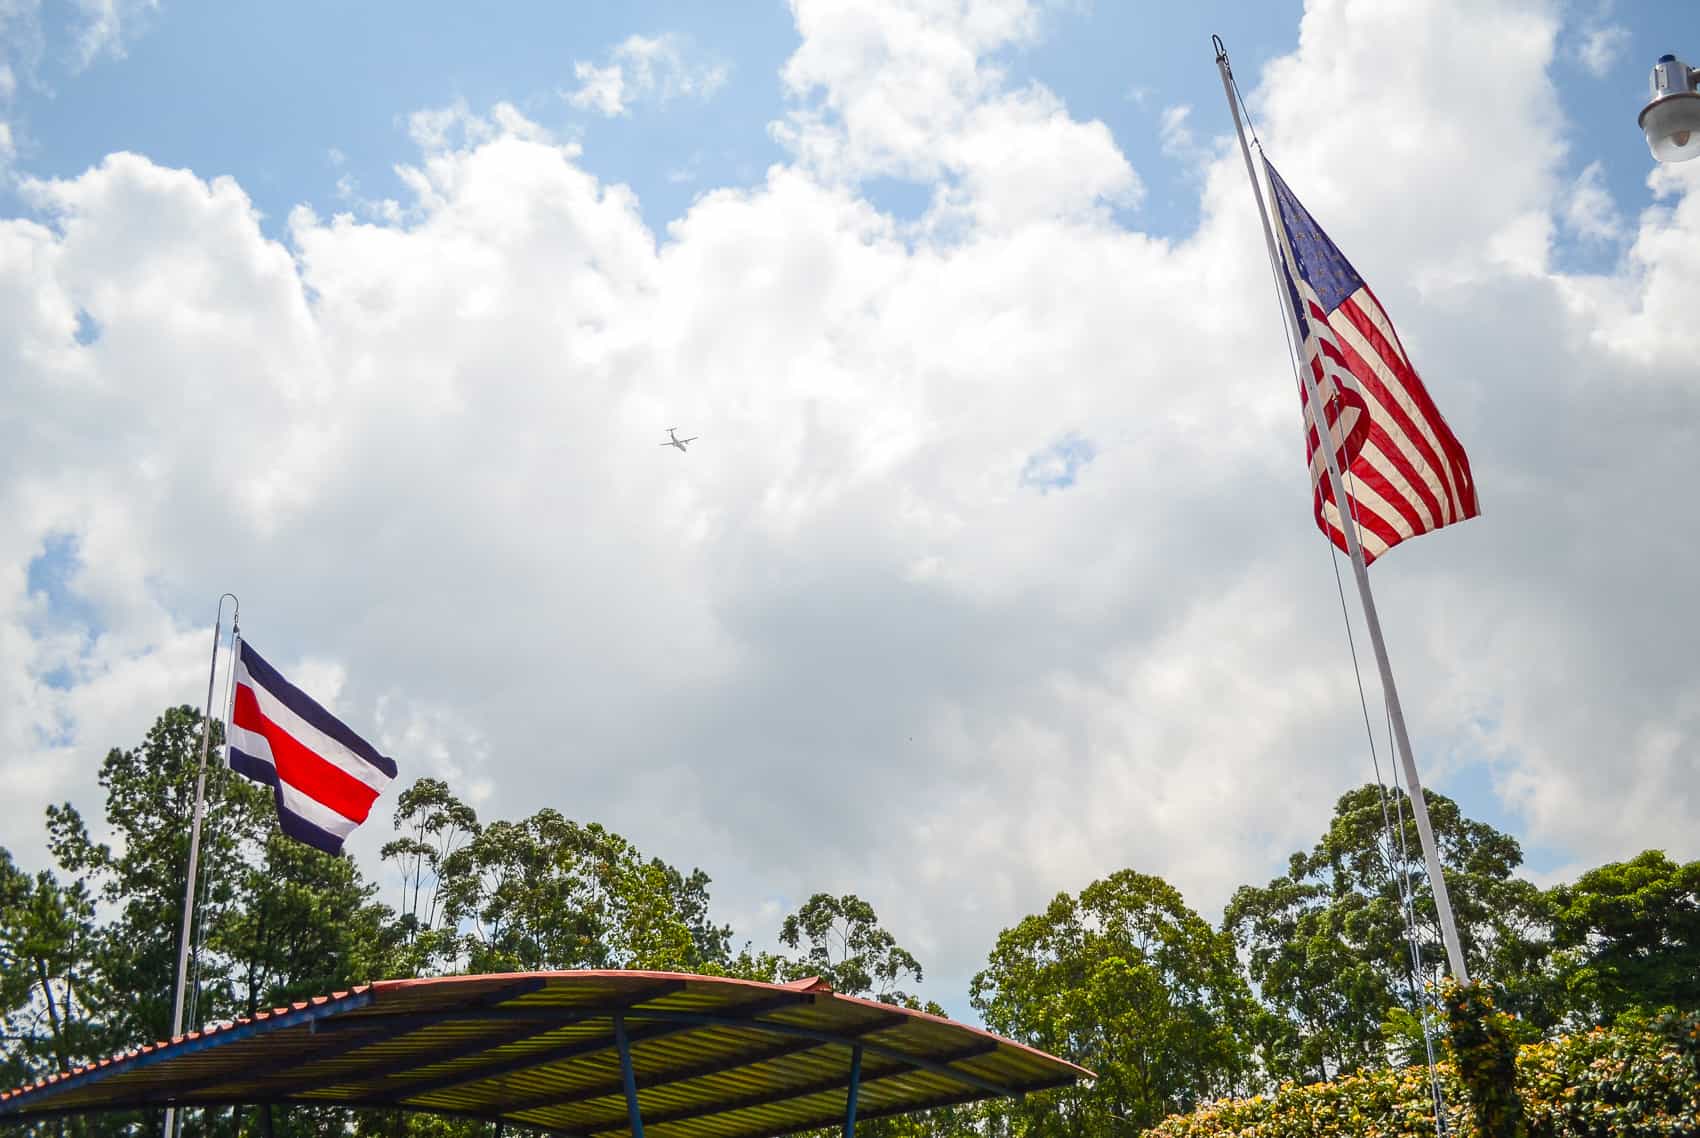 The Costa Rican and U.S. flags flying side-by-side.